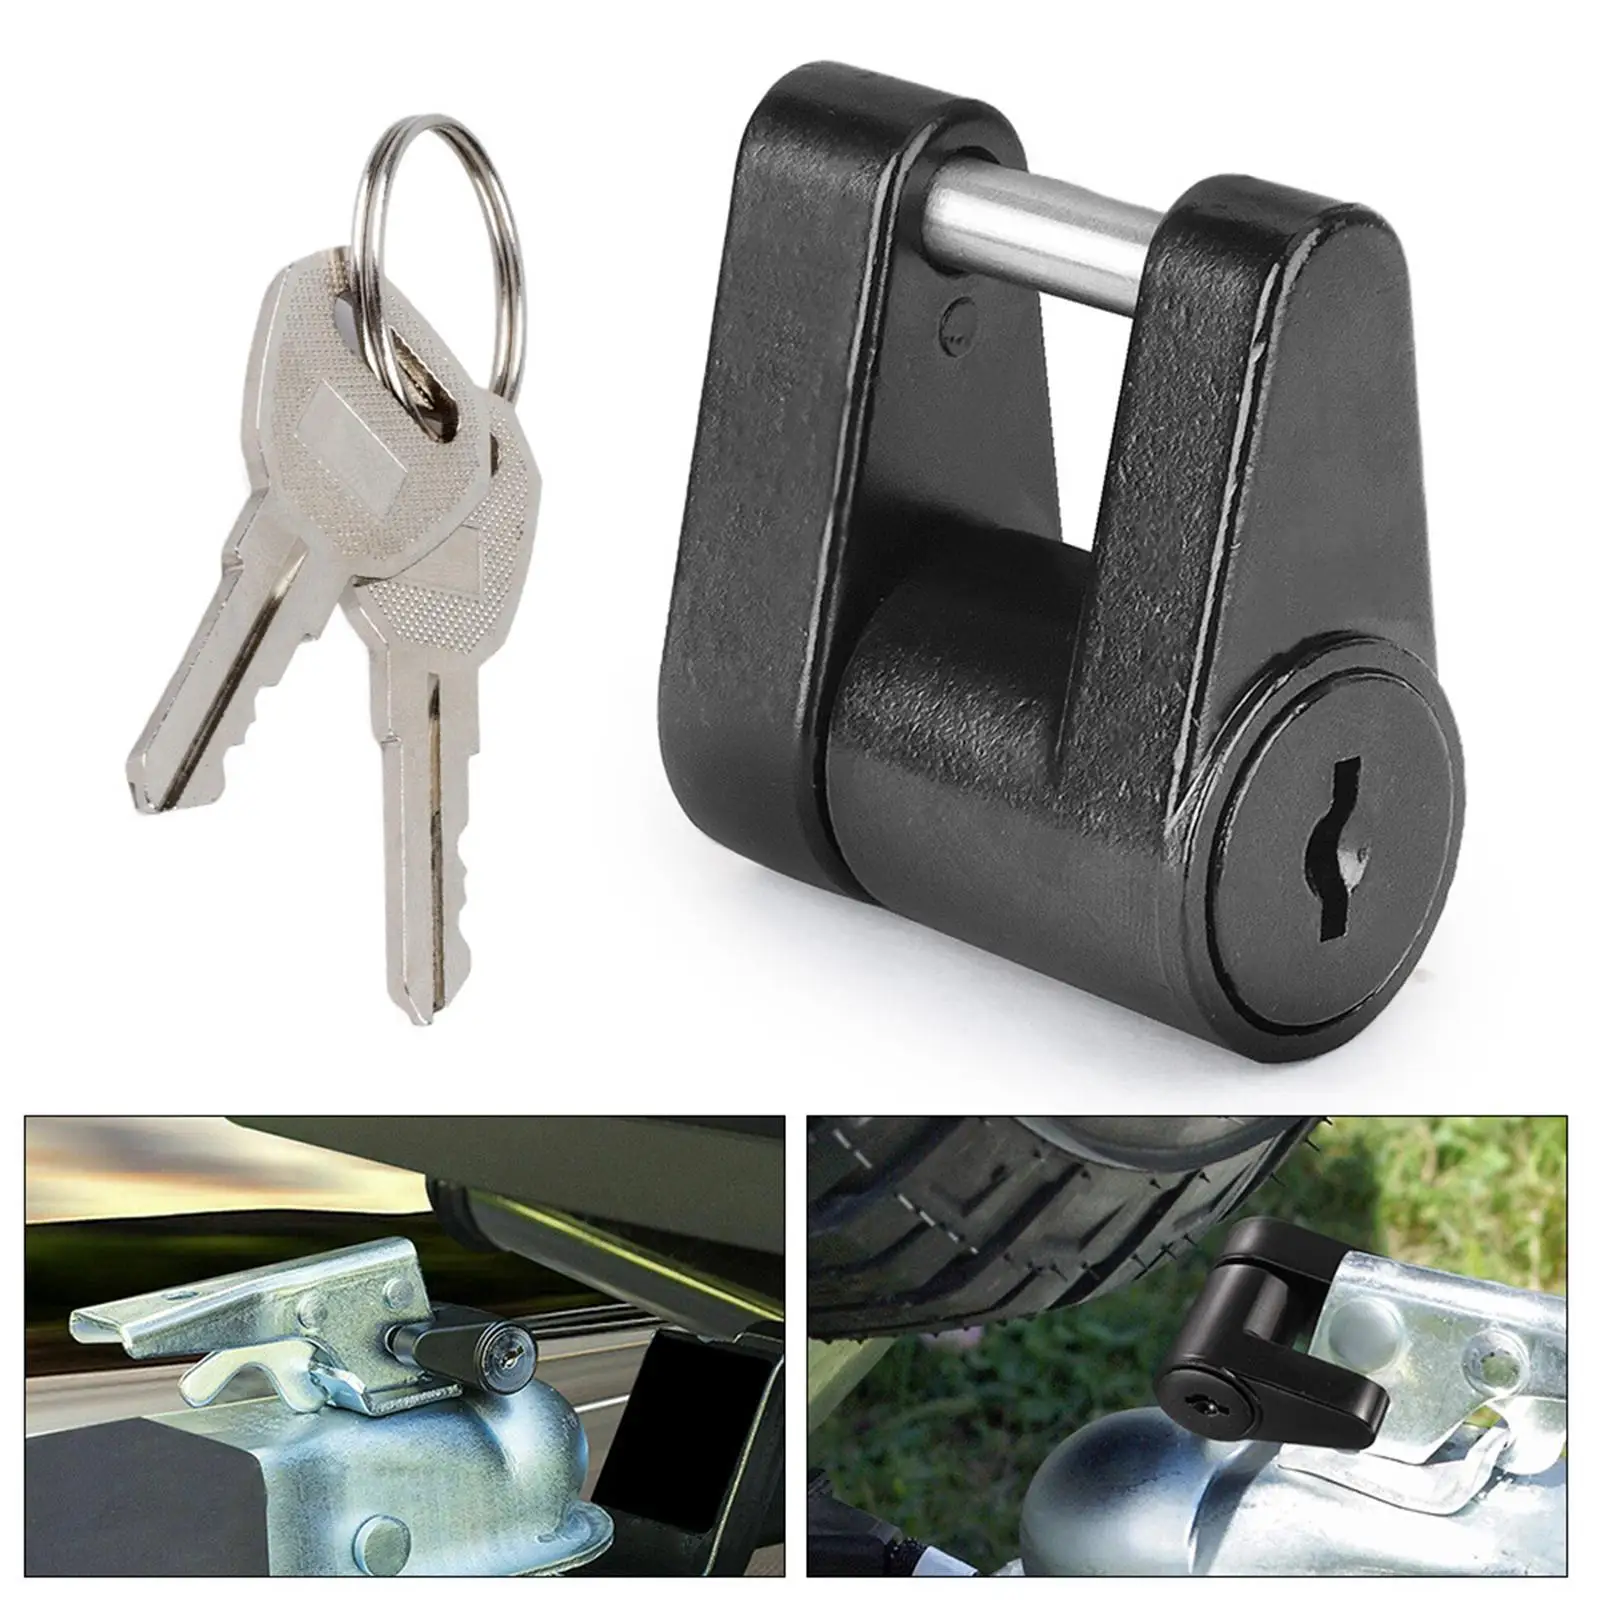 Trailer Coupler Lock with 2 Keys 1/4 inch pin 3/4 inch Span for Car`S Coupler Tow Boat Construction Vehicles RV Truck